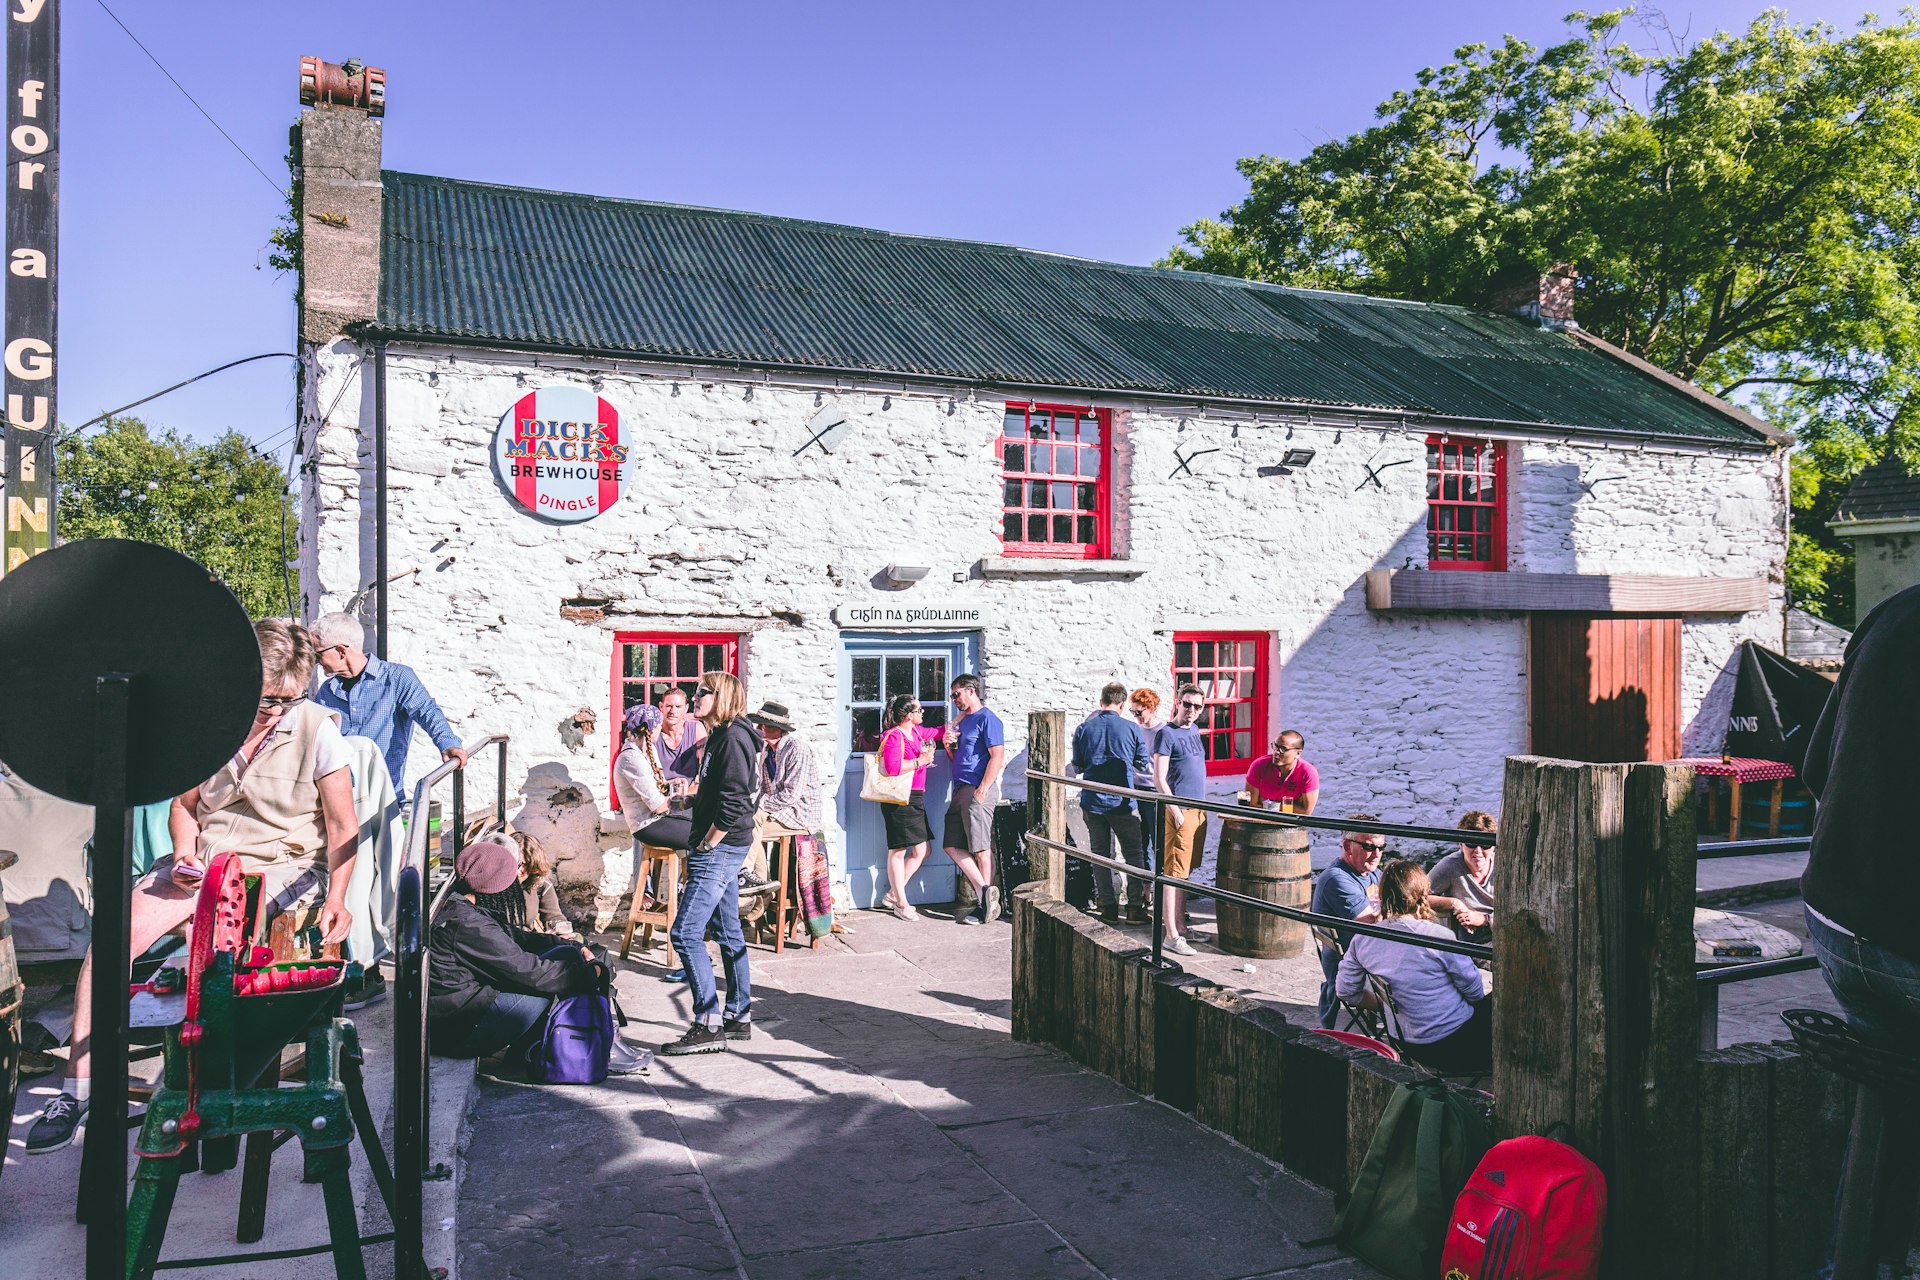 People drinking outside a pub made of white-washed stone on a sunny day.